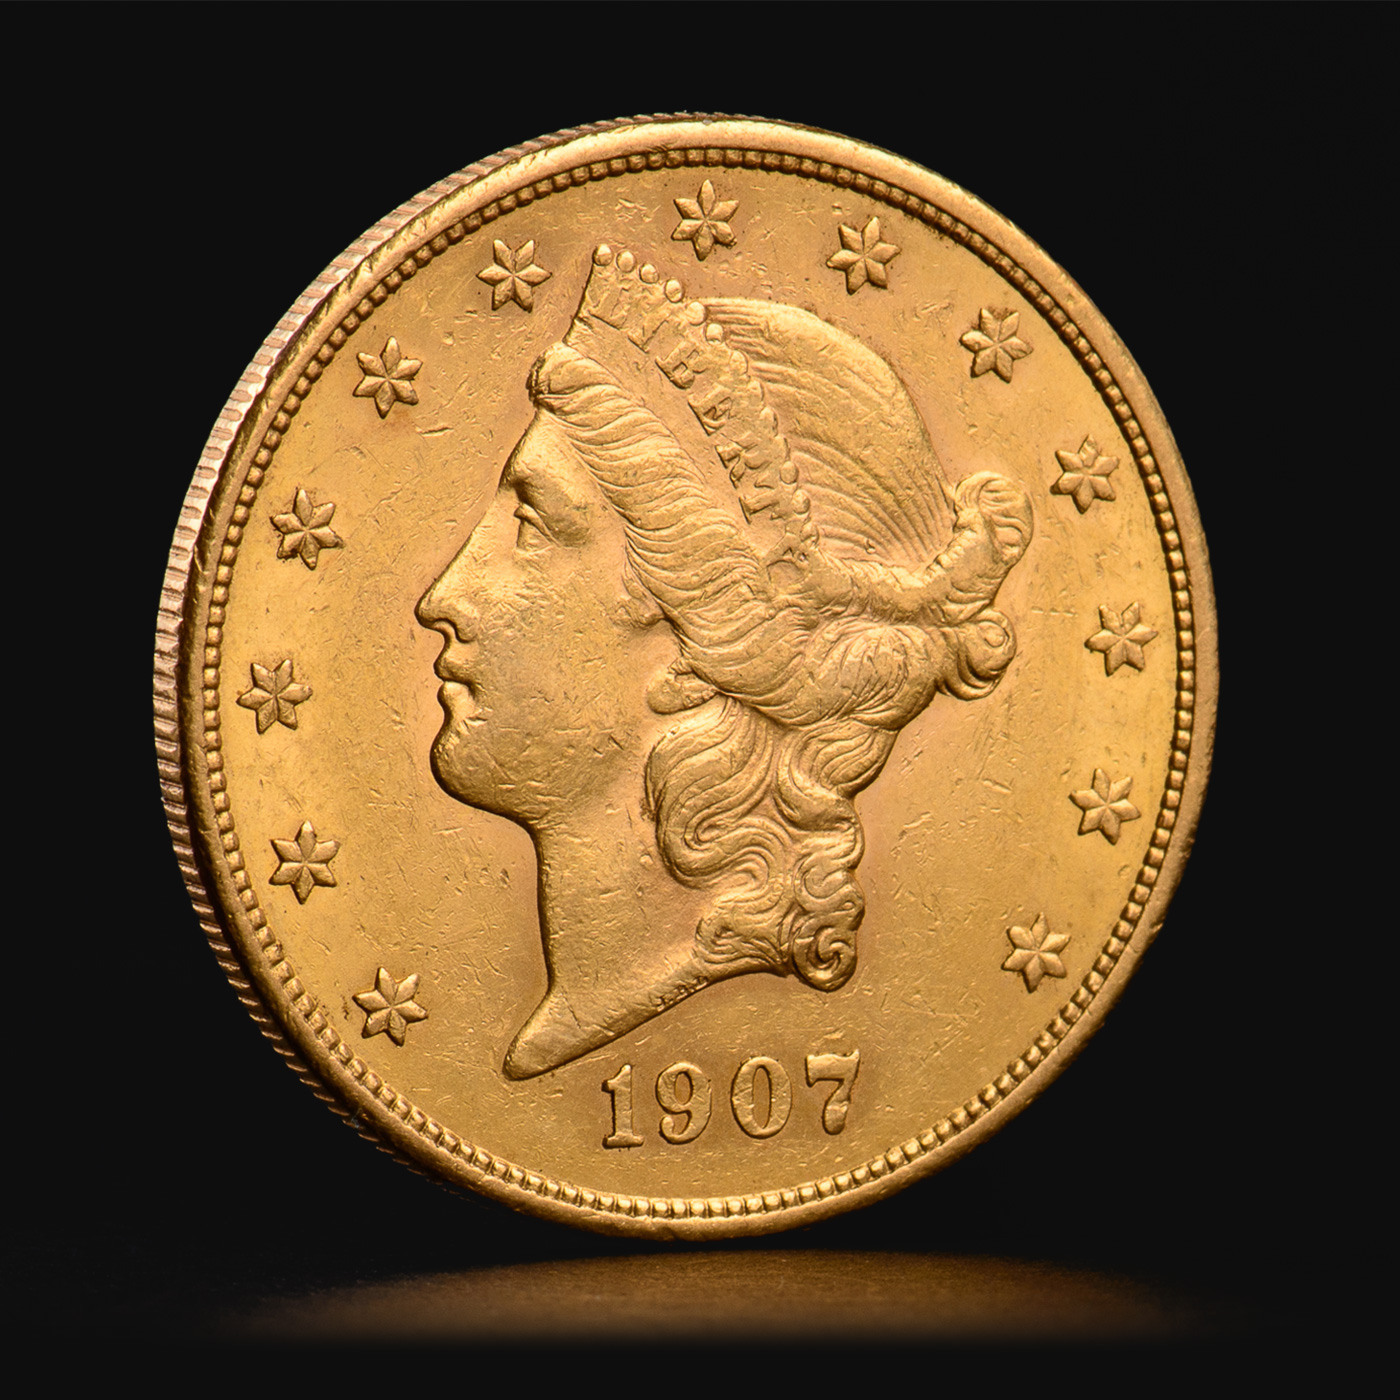 American Liberty Head Double Eagle gold coin | Tavex